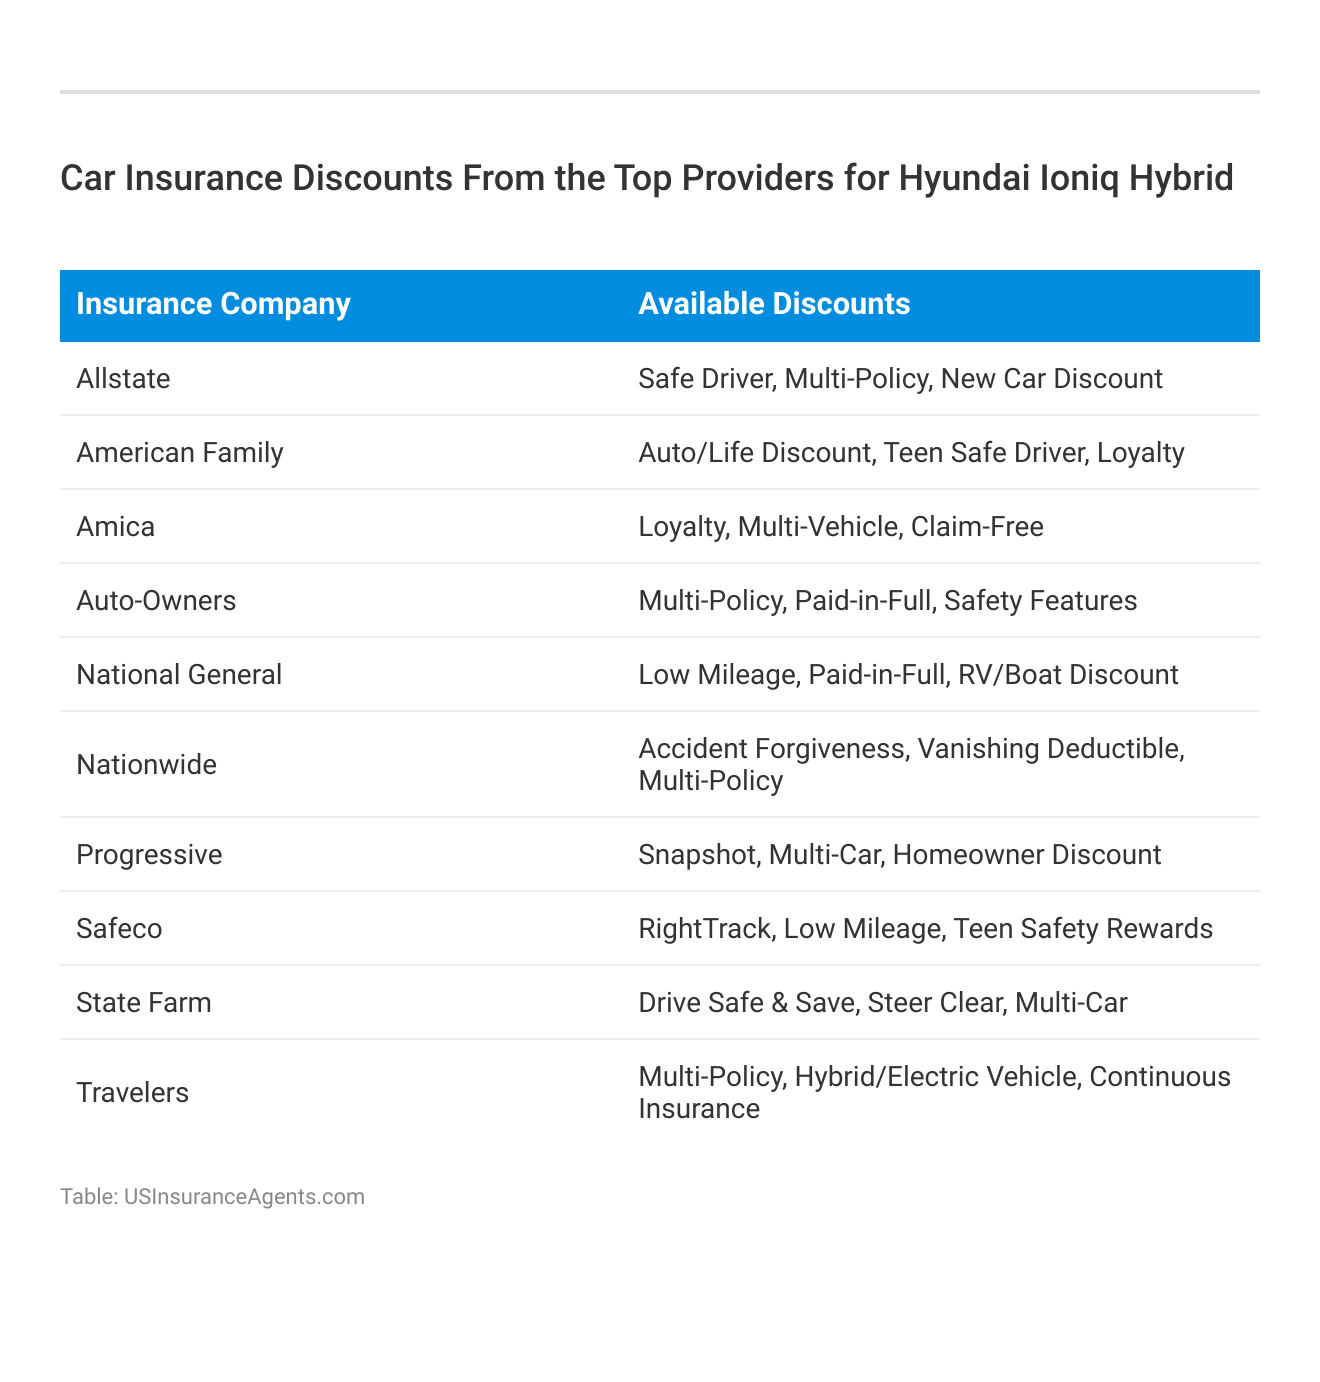 <h3>Car Insurance Discounts From the Top Providers for Hyundai Ioniq Hybrid</h3>